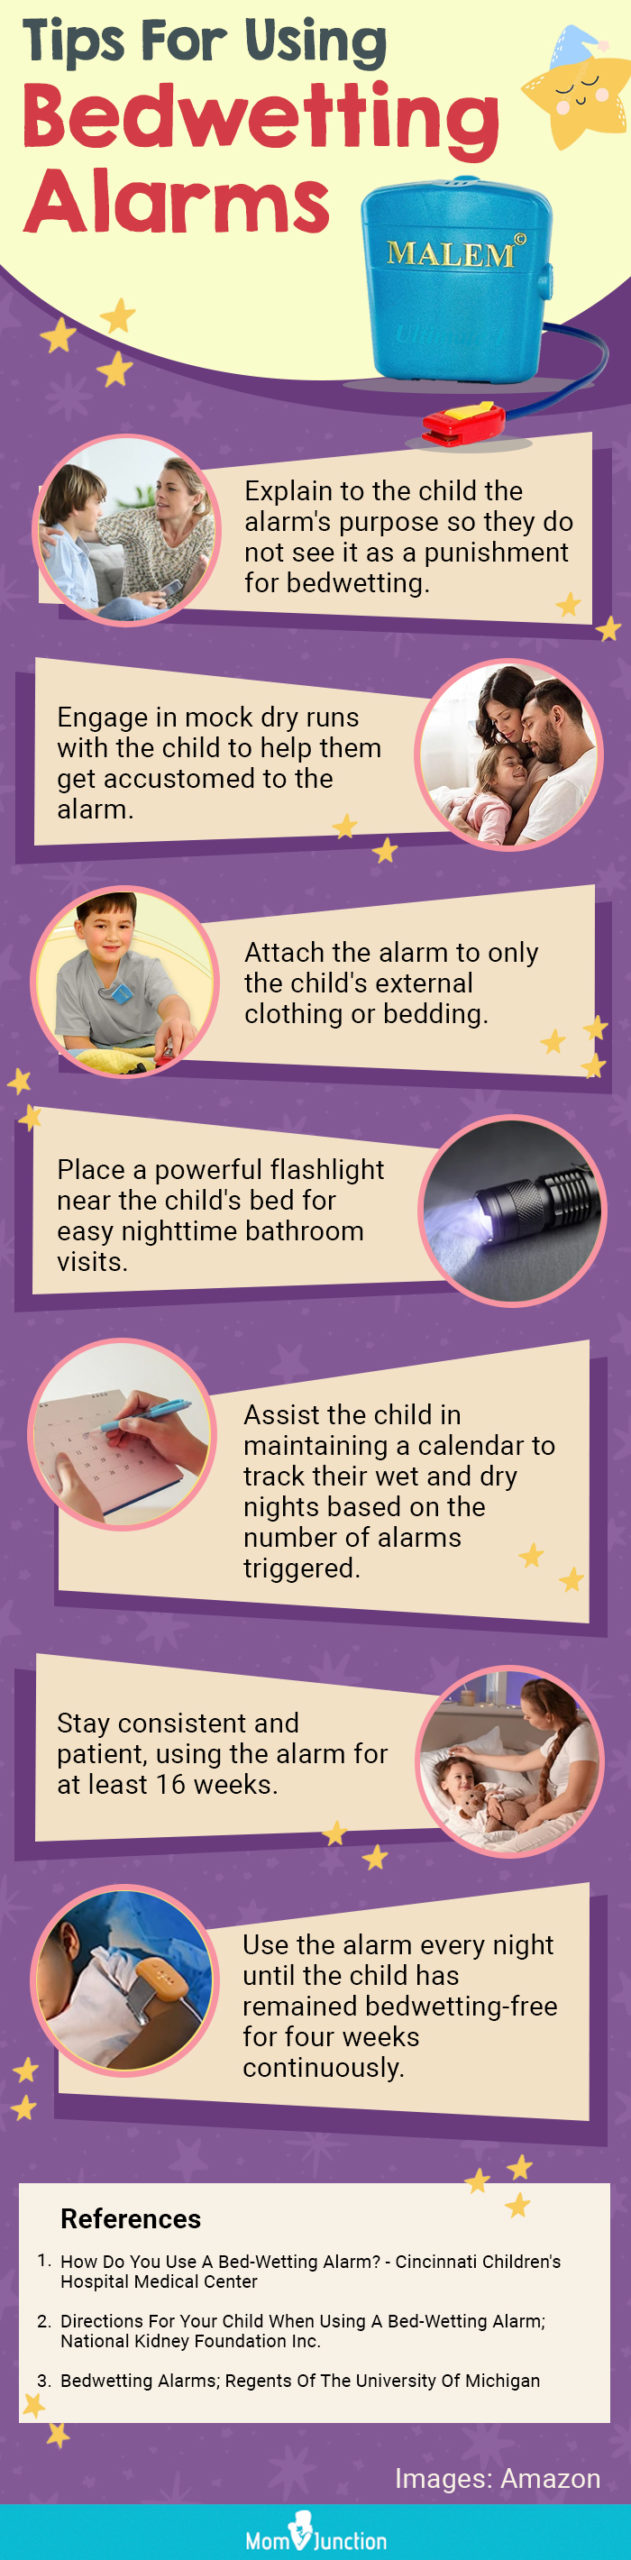 Tips For Using Bedwetting Alarms(infographic)